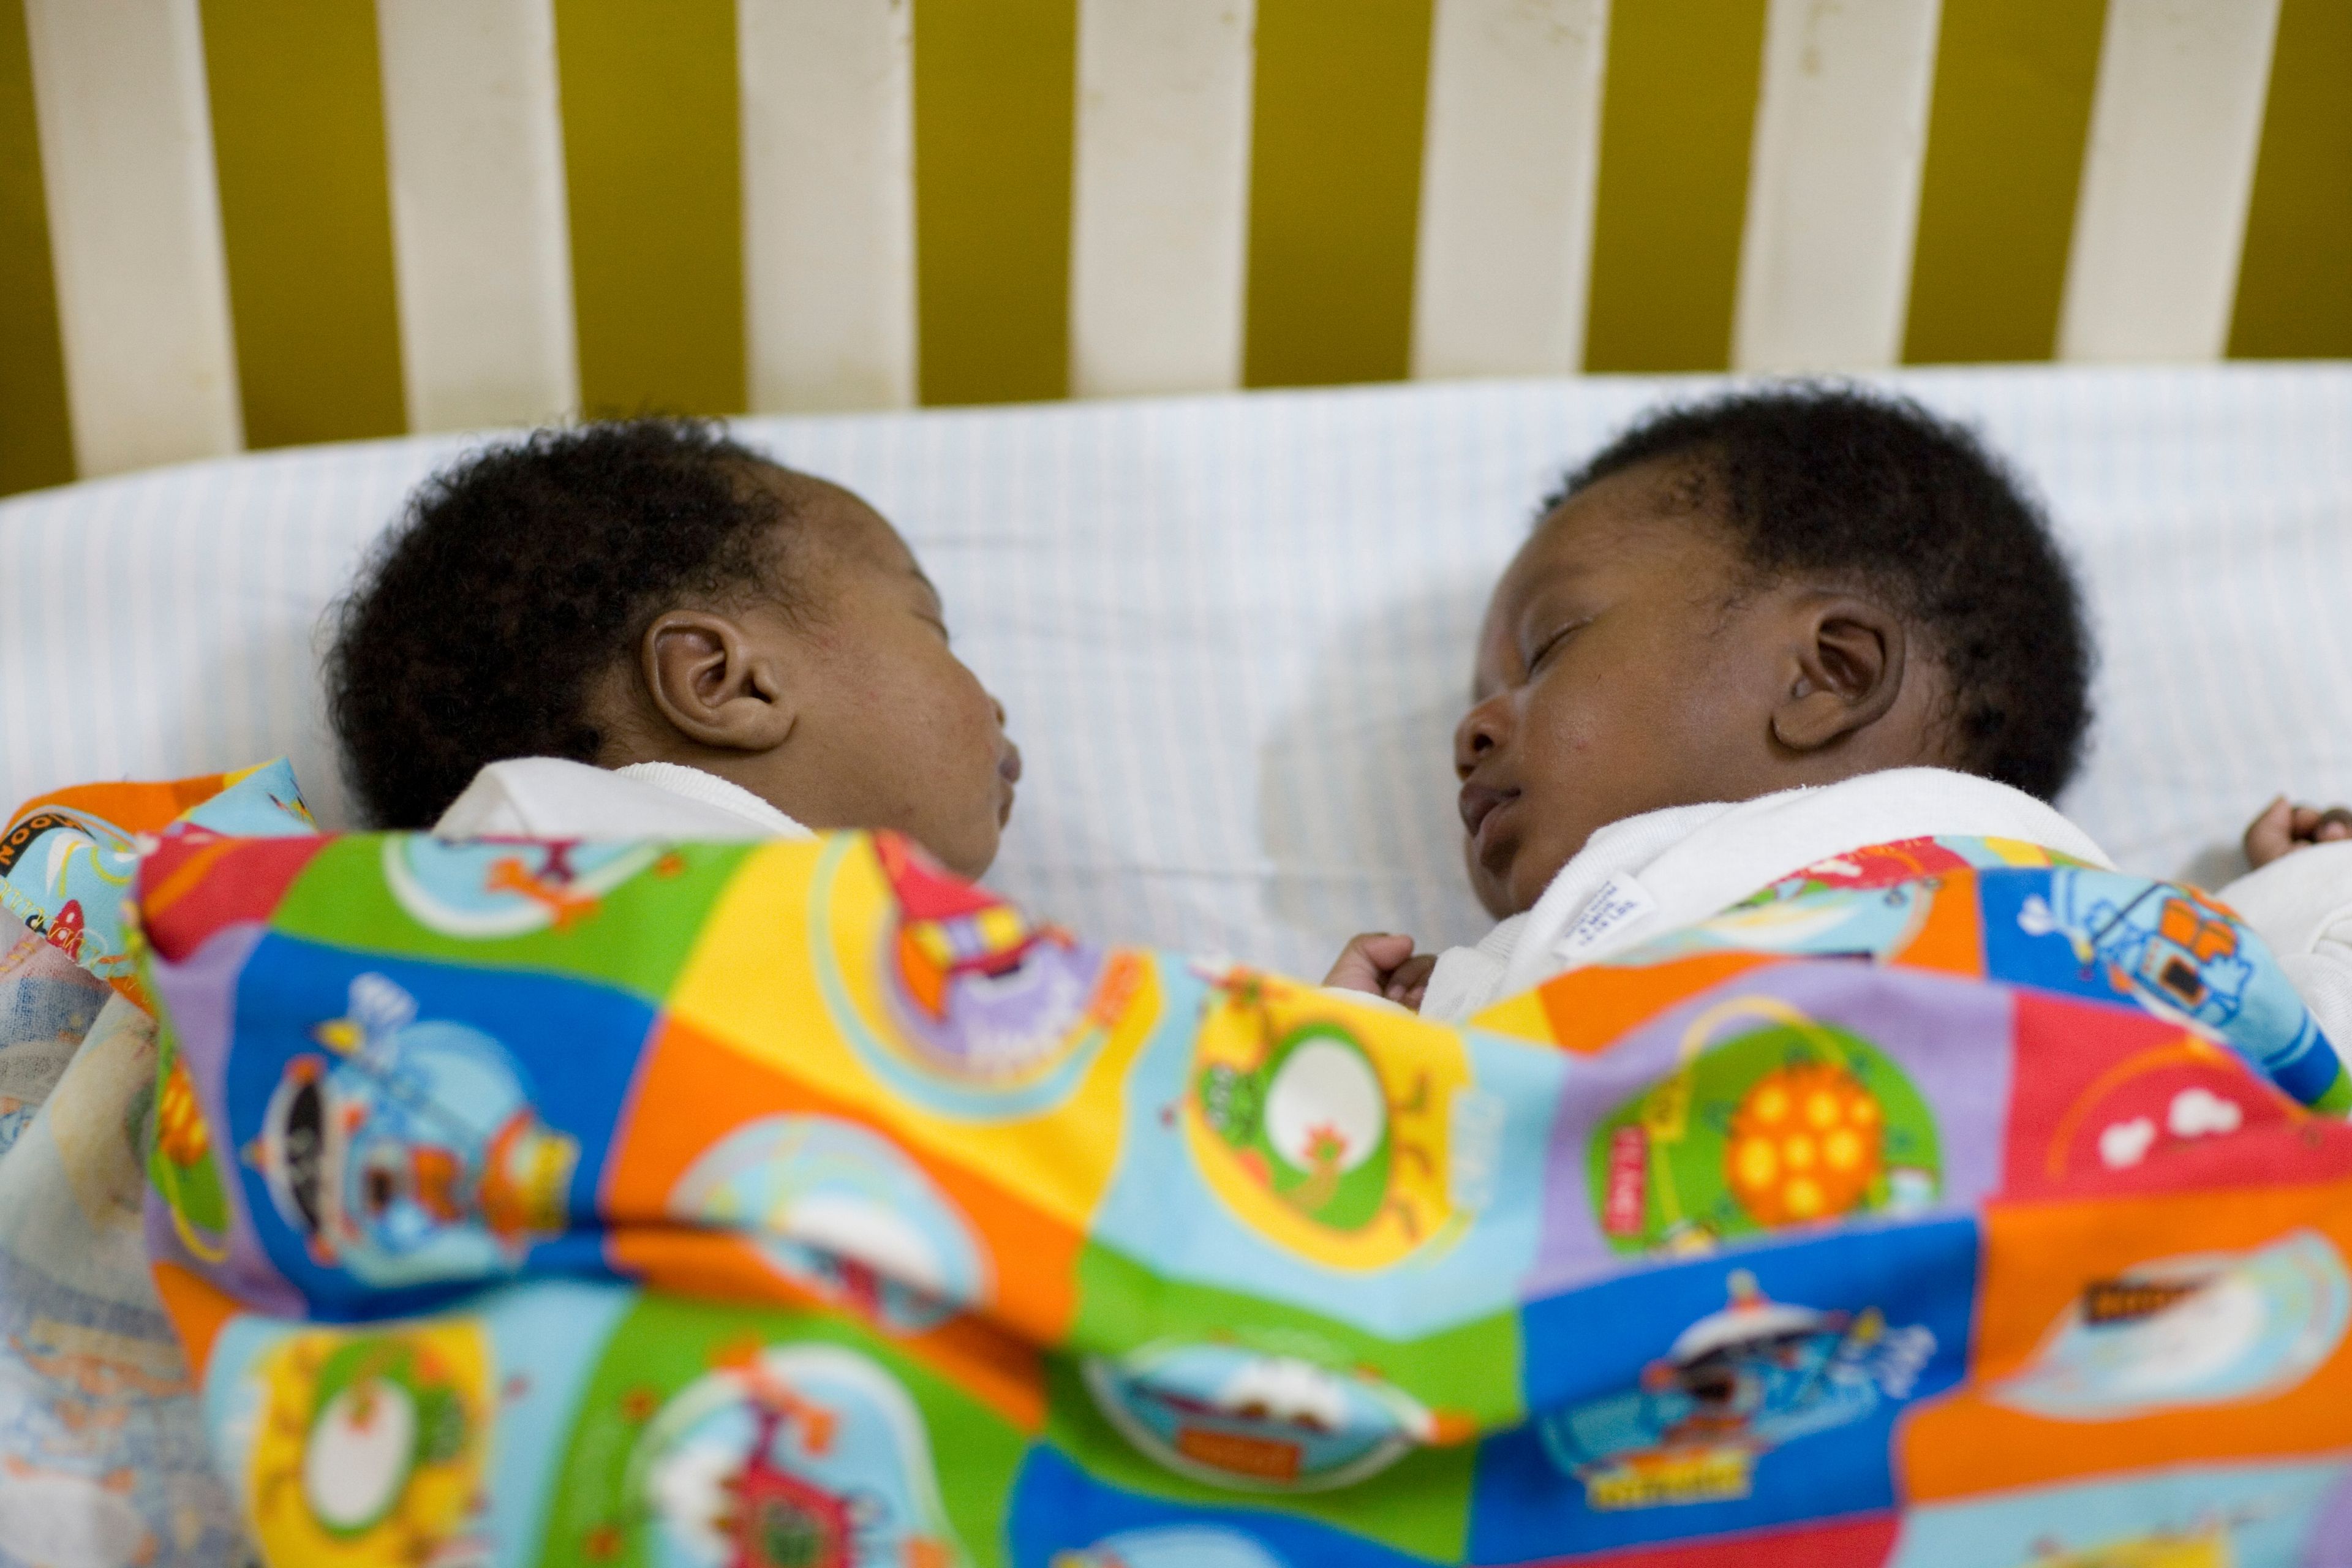 Twin boys from Ghana sleeping next to one another.